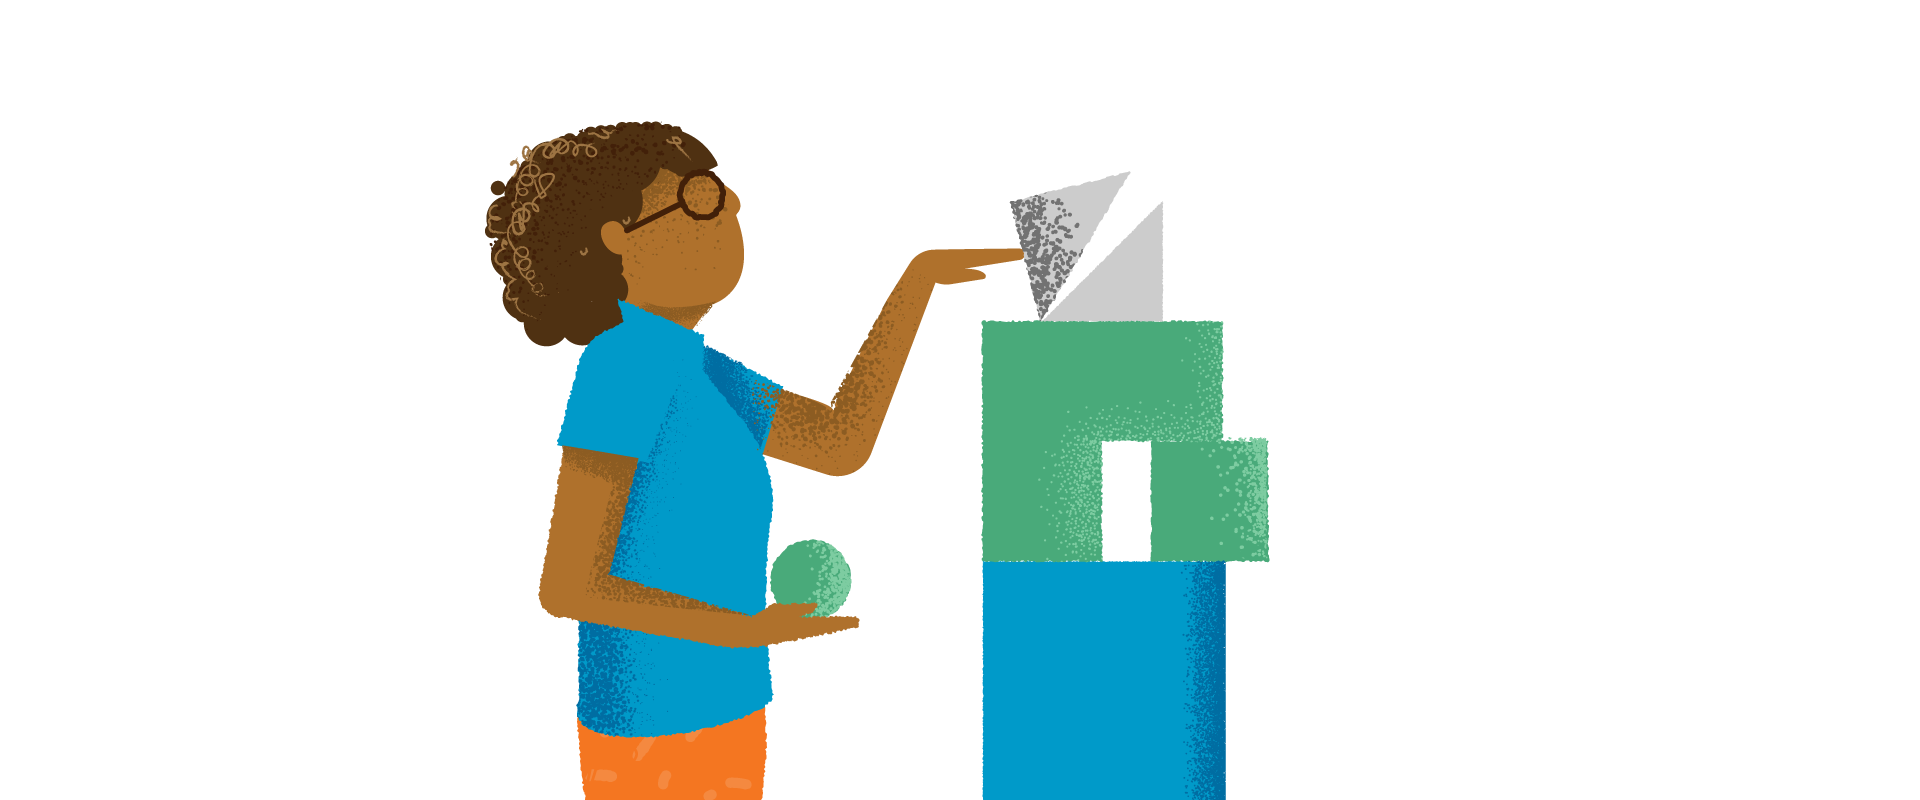 Illustration of woman with building blocks